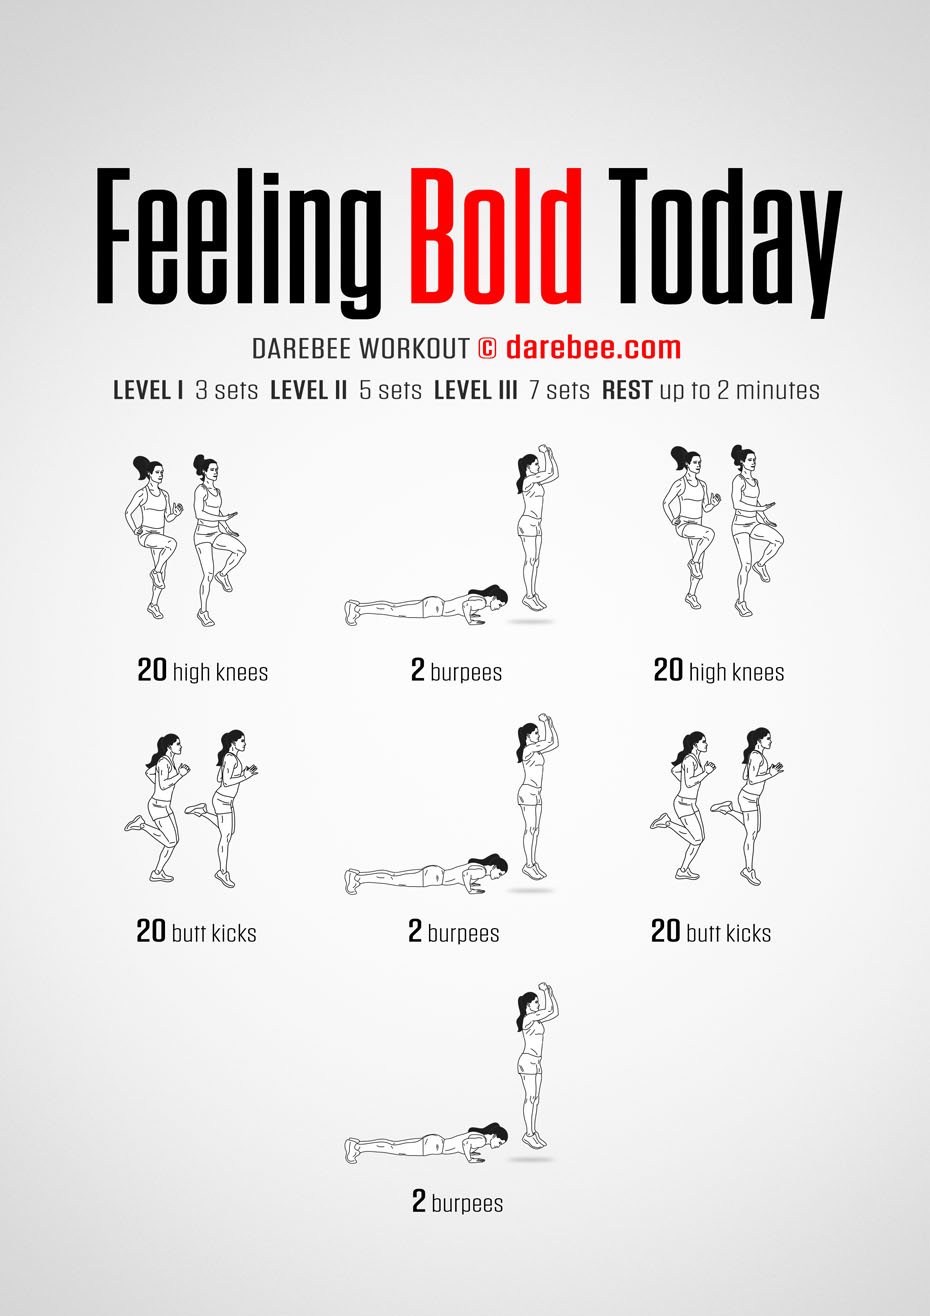 Feeling Bold Today is a Darebee home-fitness, cardiovascular-challenging, aerobic capacity testing workout that will also leave you feeling great.